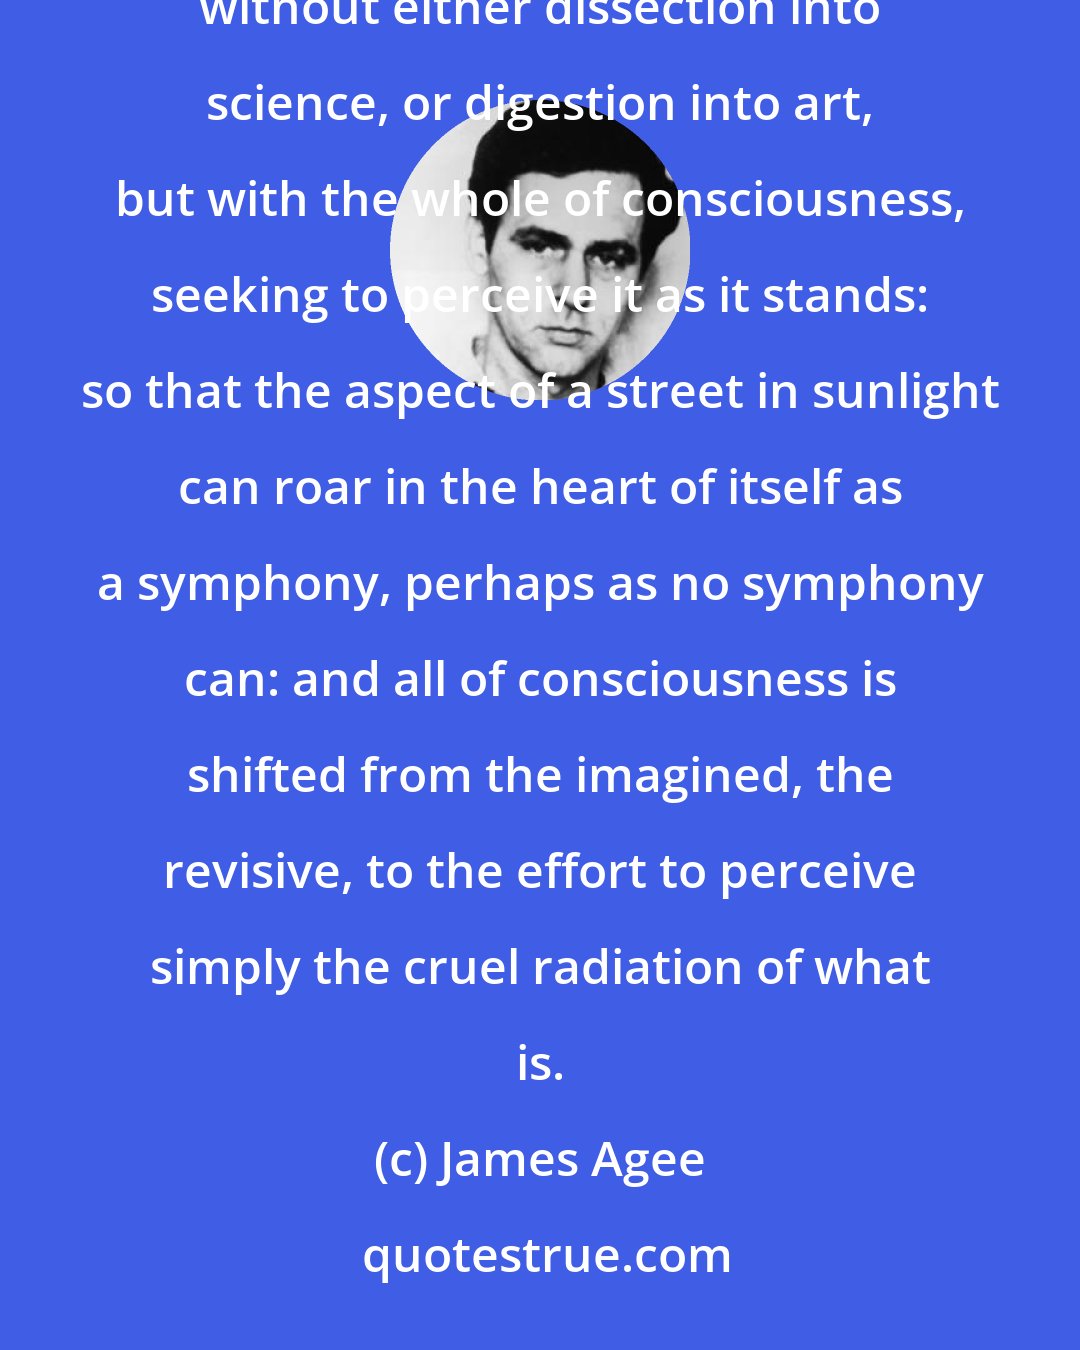 James Agee: For in the immediate world, everything is to be discerned, for him who can discern it, and central and simply, without either dissection into science, or digestion into art, but with the whole of consciousness, seeking to perceive it as it stands: so that the aspect of a street in sunlight can roar in the heart of itself as a symphony, perhaps as no symphony can: and all of consciousness is shifted from the imagined, the revisive, to the effort to perceive simply the cruel radiation of what is.